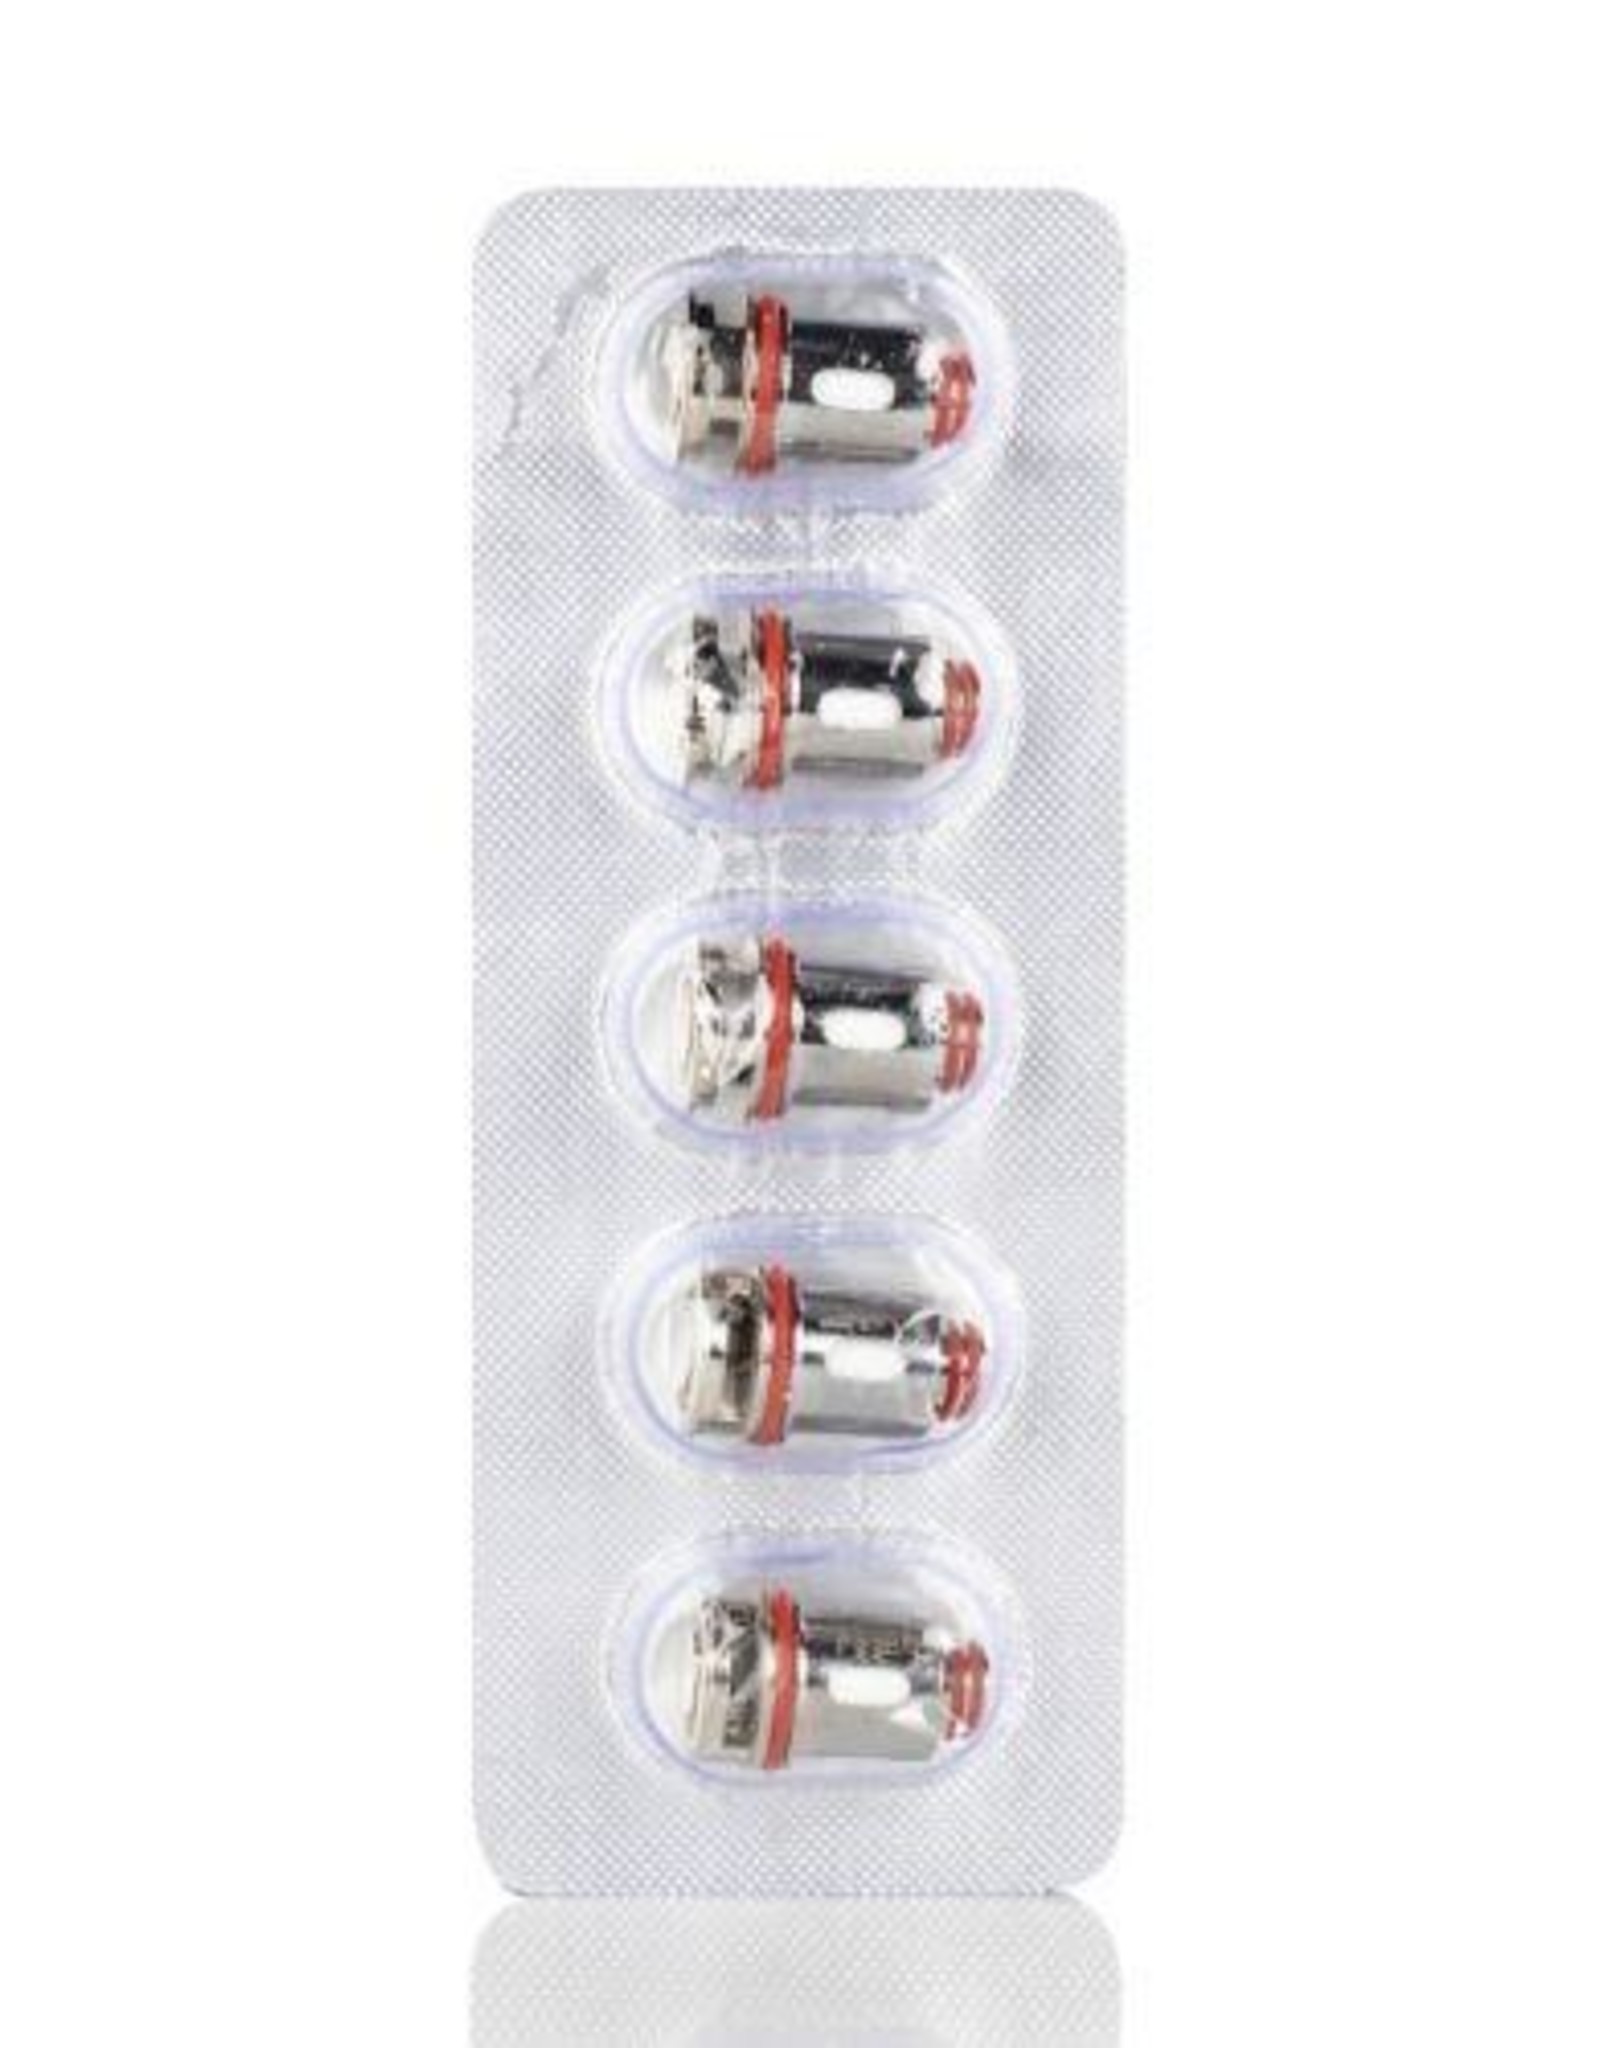 SMOK SMOK RPM2 REPLACEMENT COIL (5 PACK)